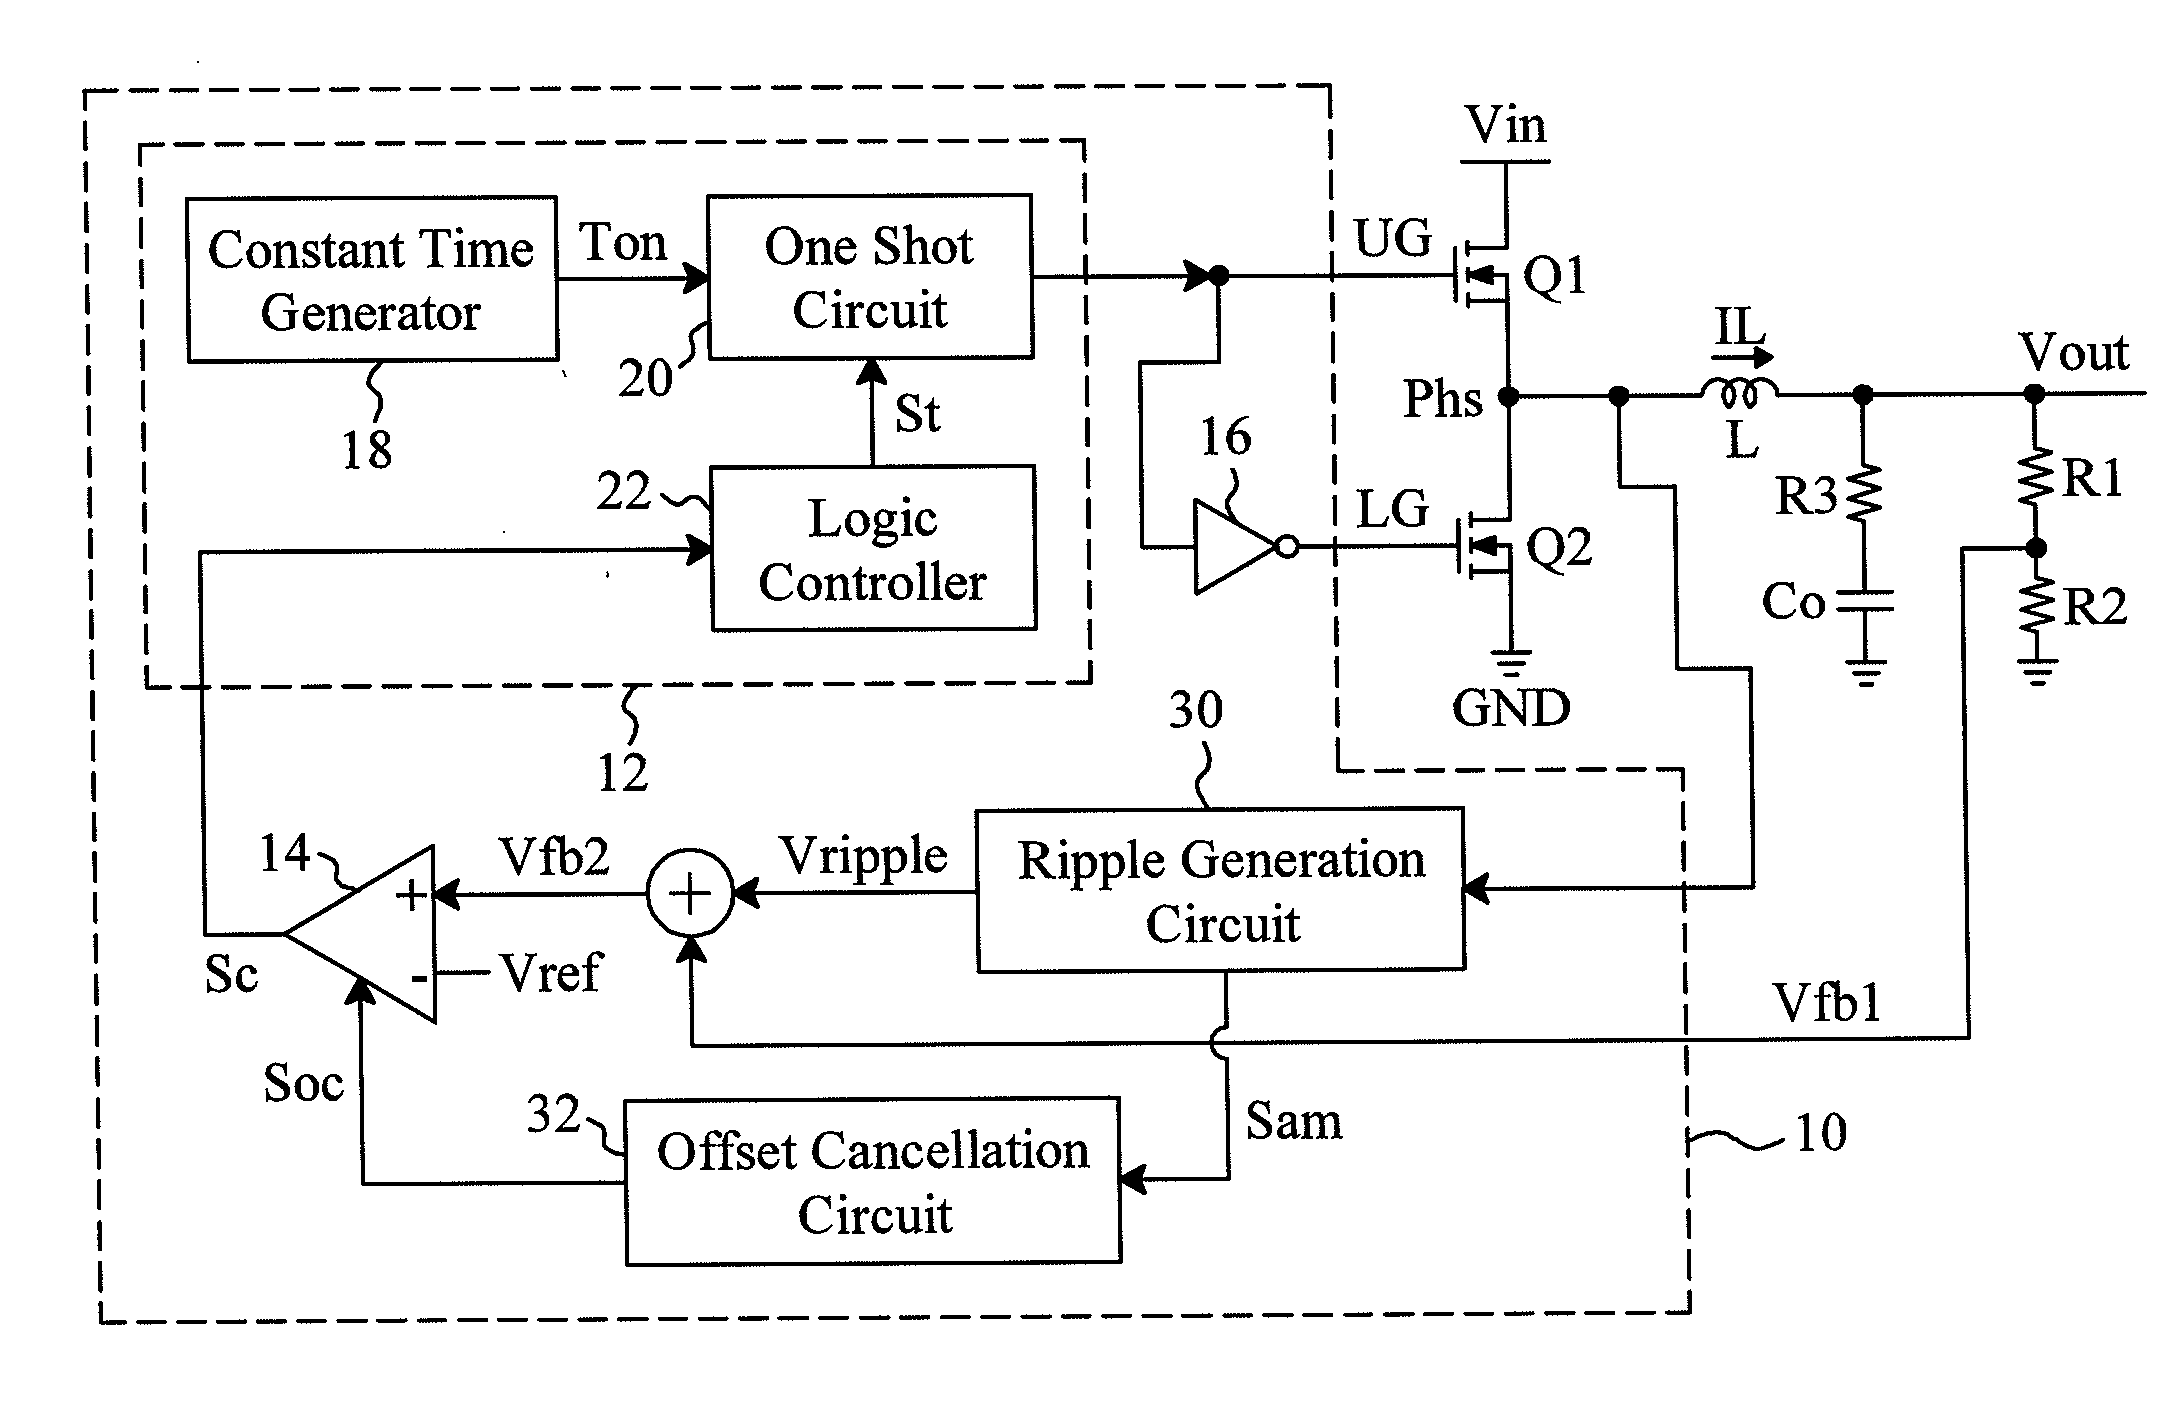 Control circuit and method for a ripple regulator system